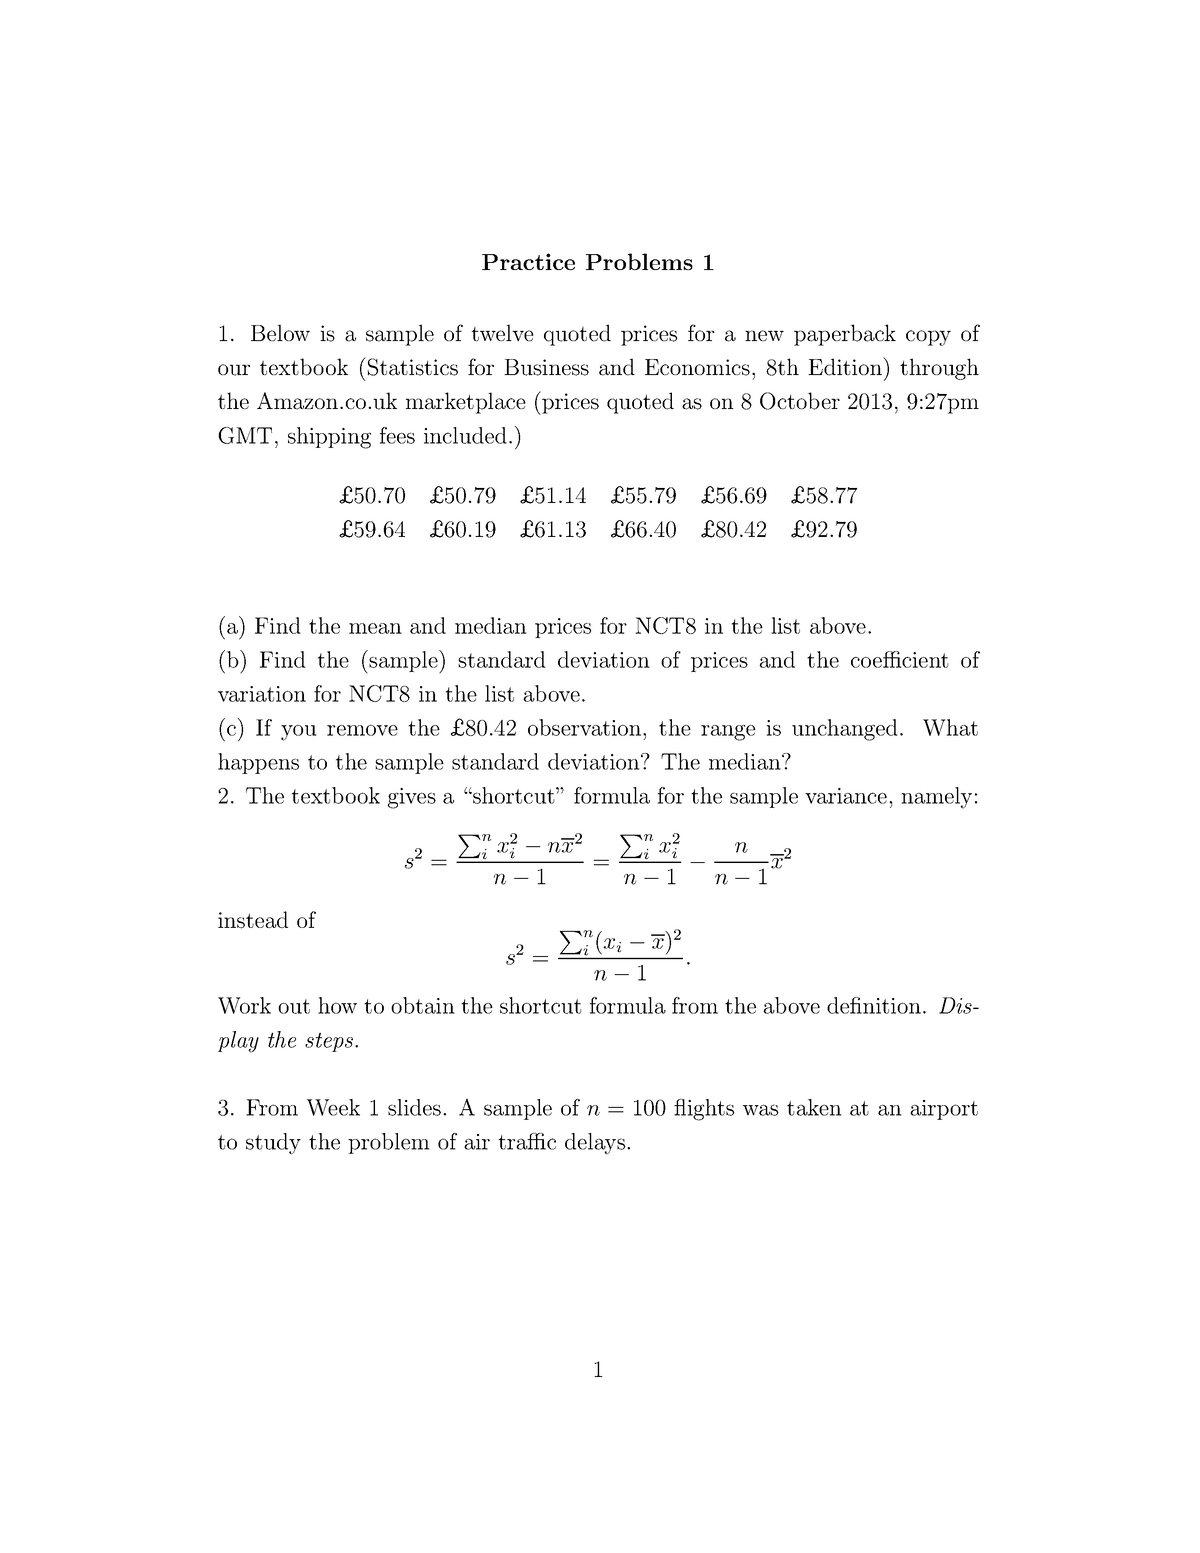 packet statistics practice problems 1 answers